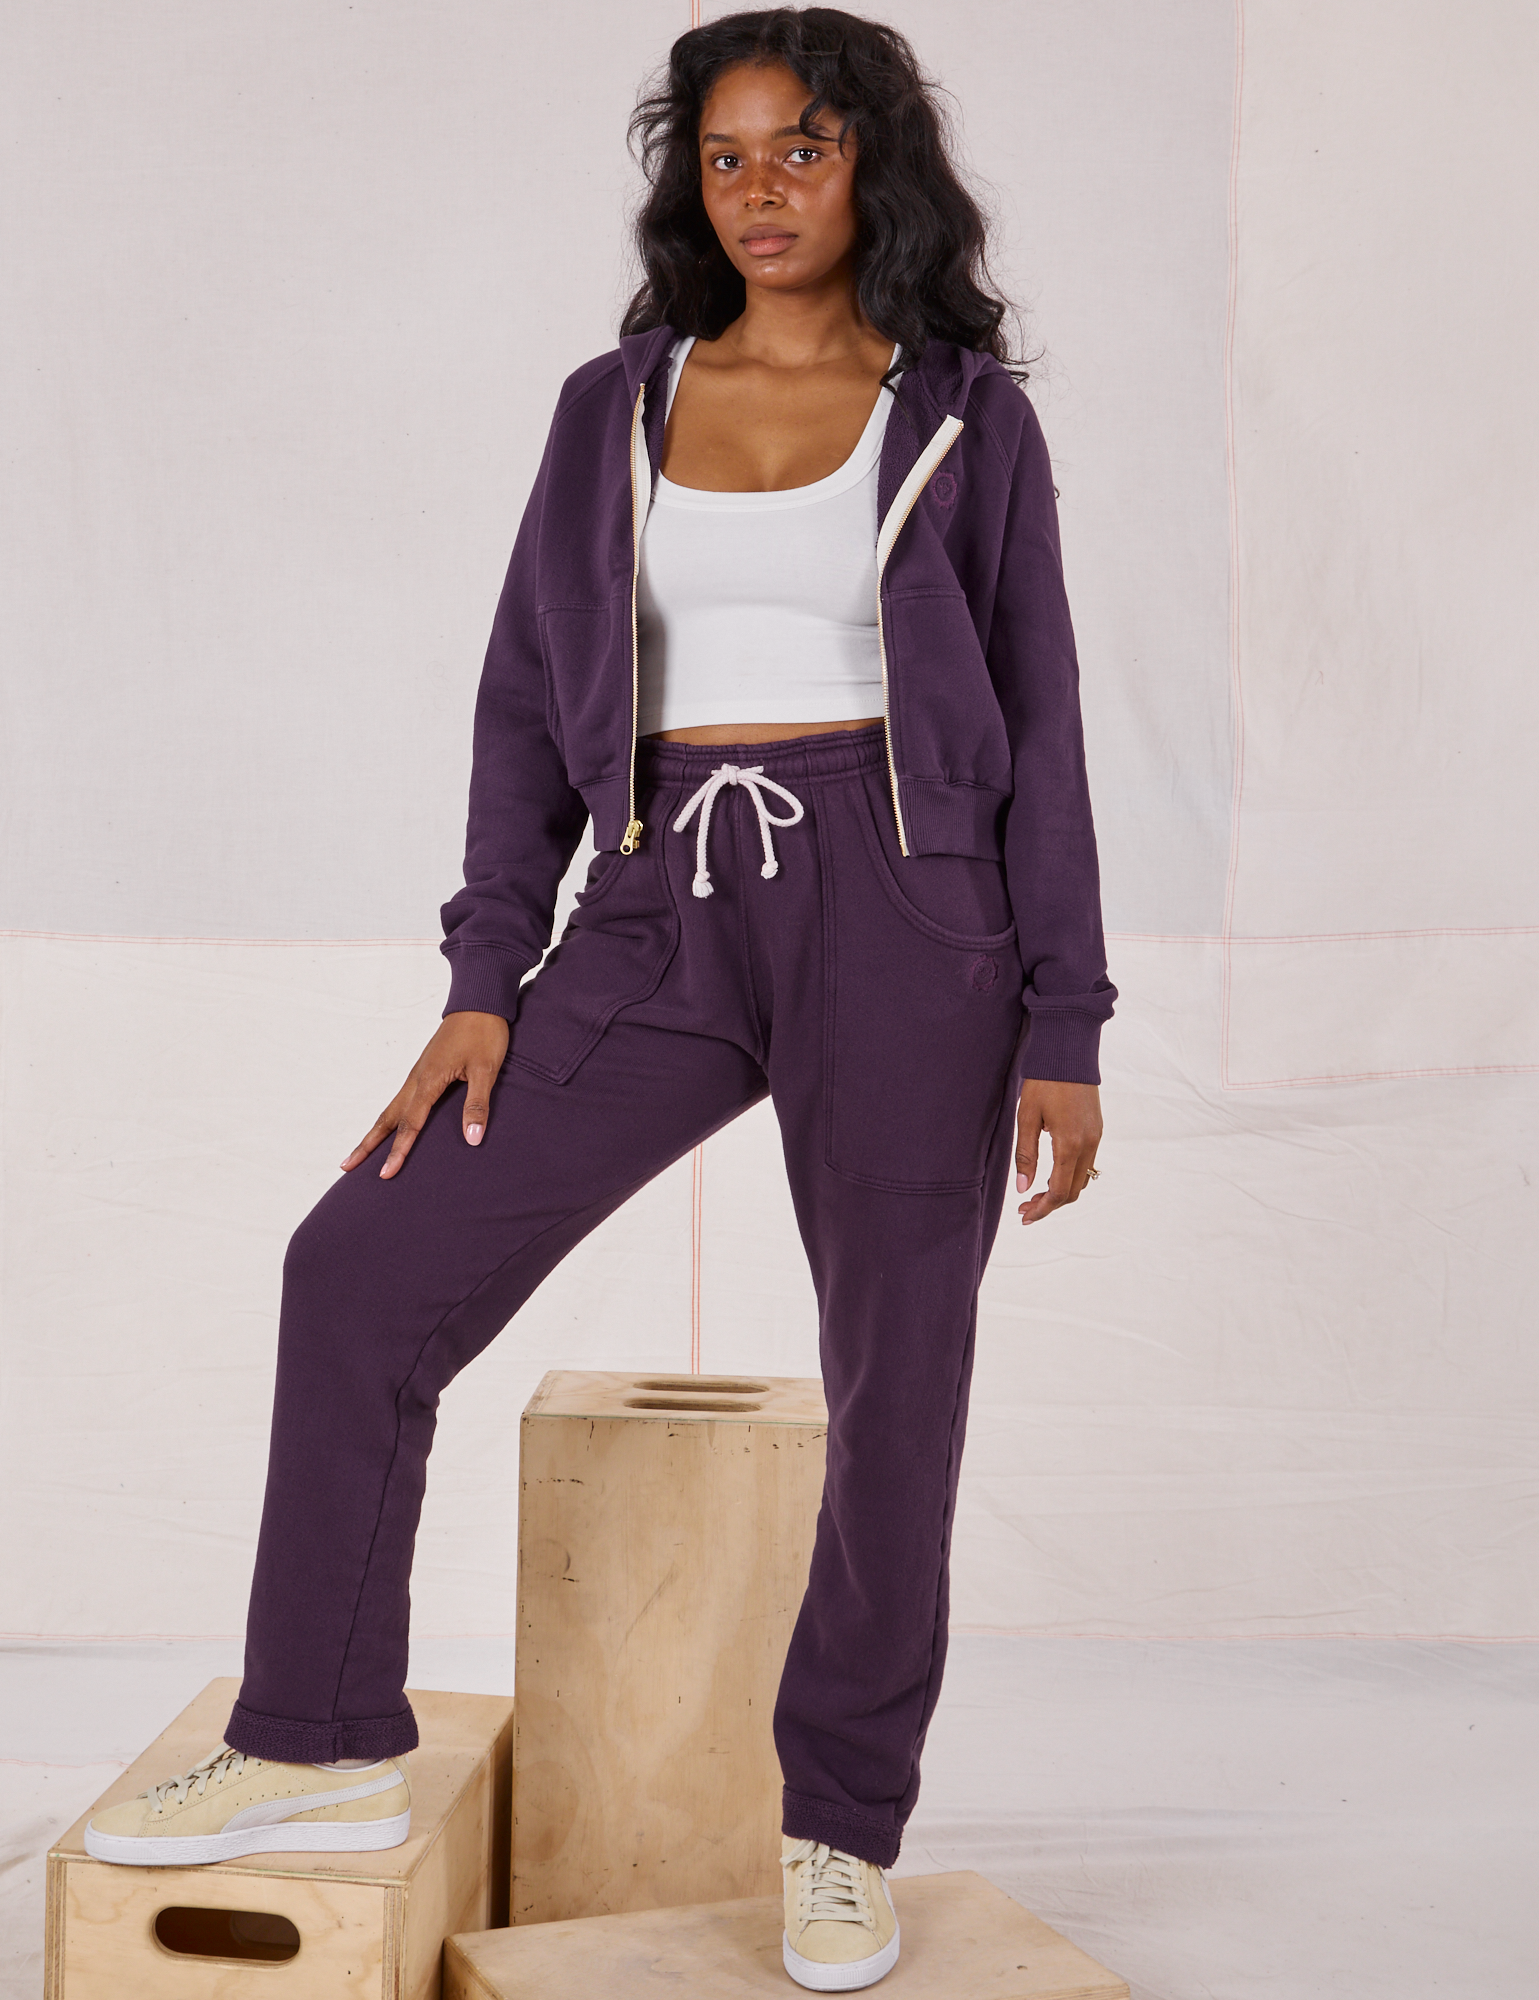 Kandia is 5'3" and wearing P Rolled Cuff Sweat Pants in Nebula Purple paired with matching Cropped Zip Hoodie and a Cropped Tank in vintage tee off-white underneath